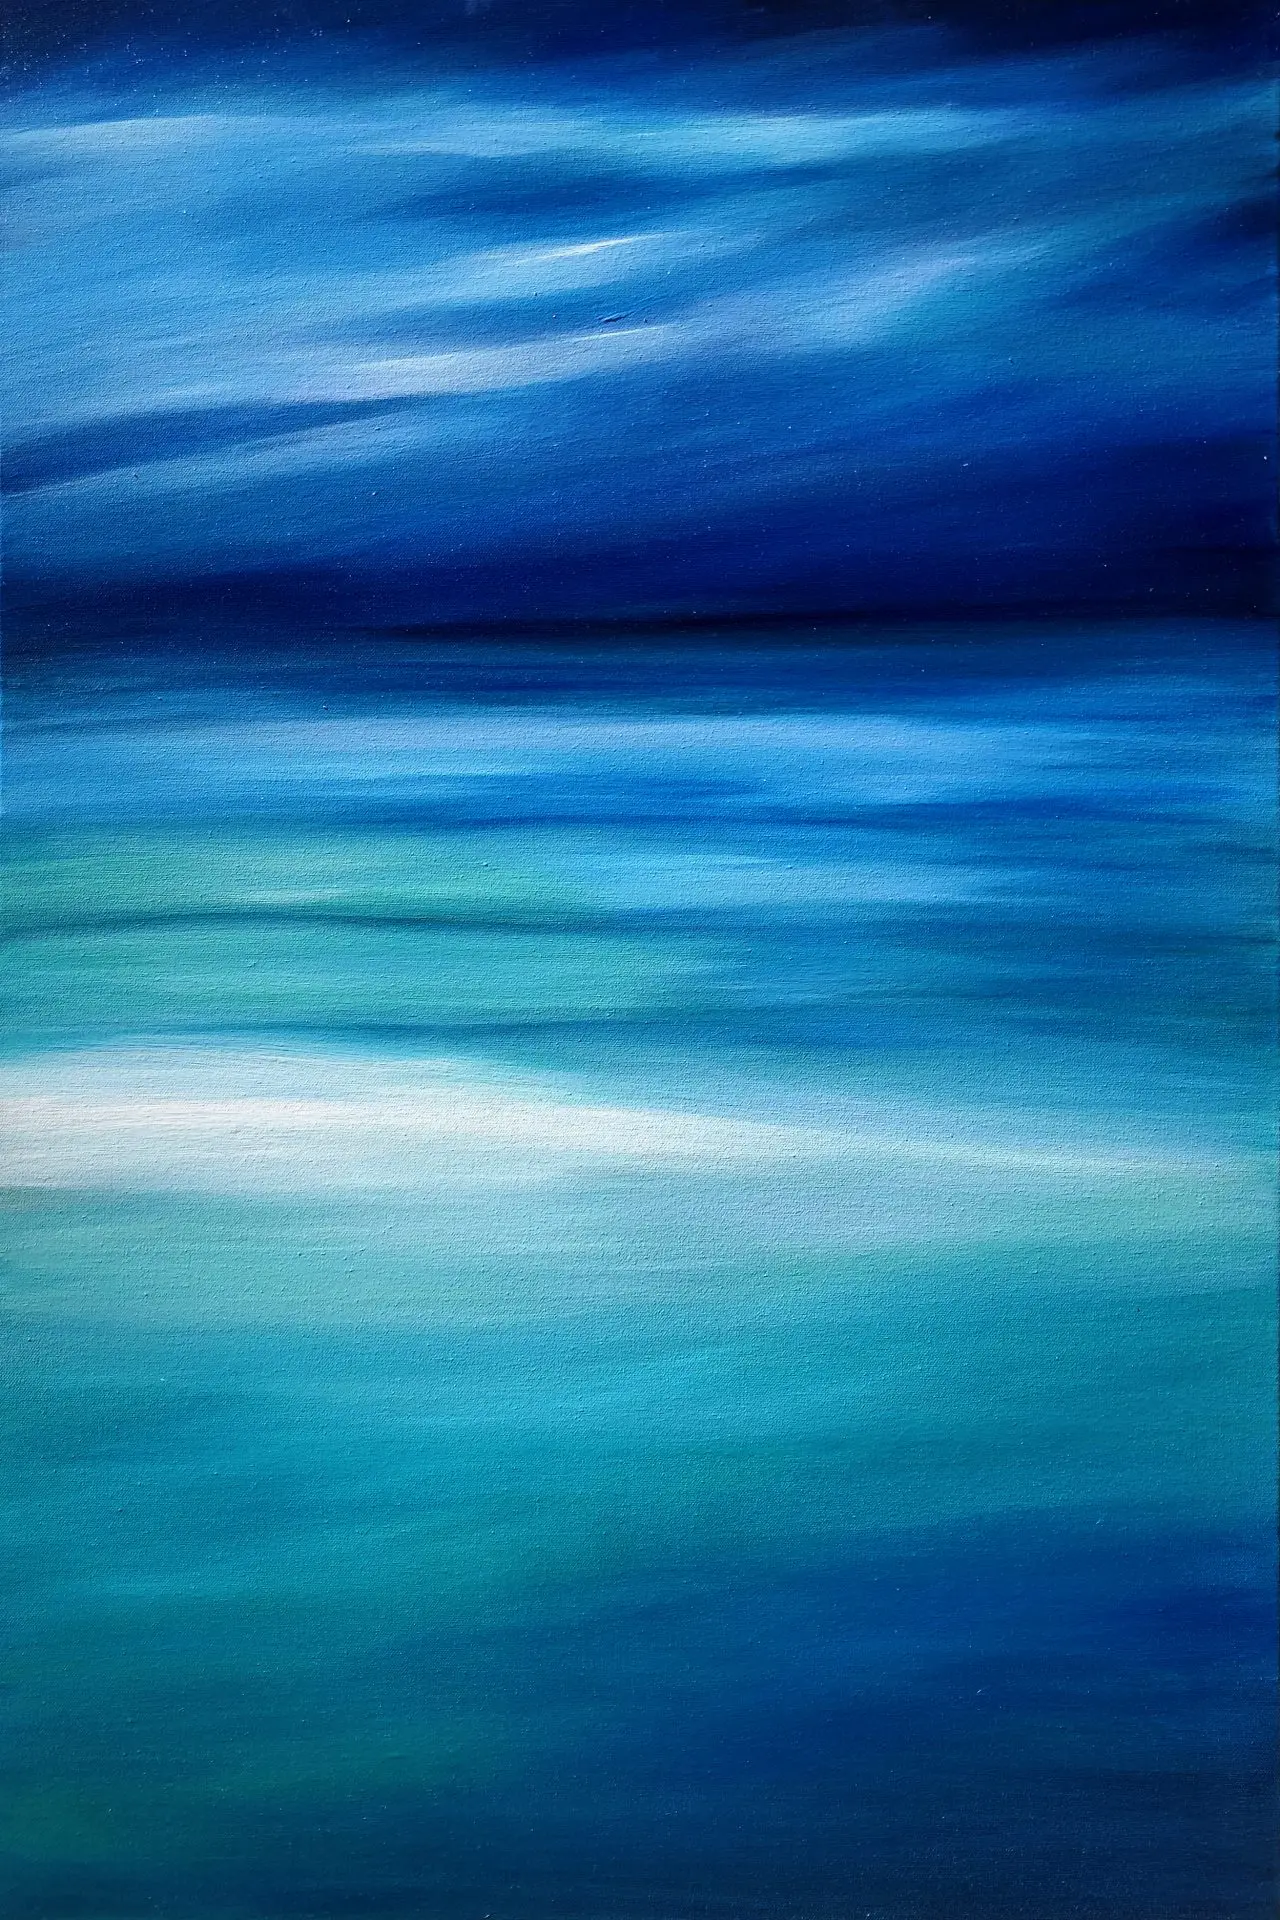 Turquoise Abstract Sea A3 Fine Art Giclee Print Framed or Unframed